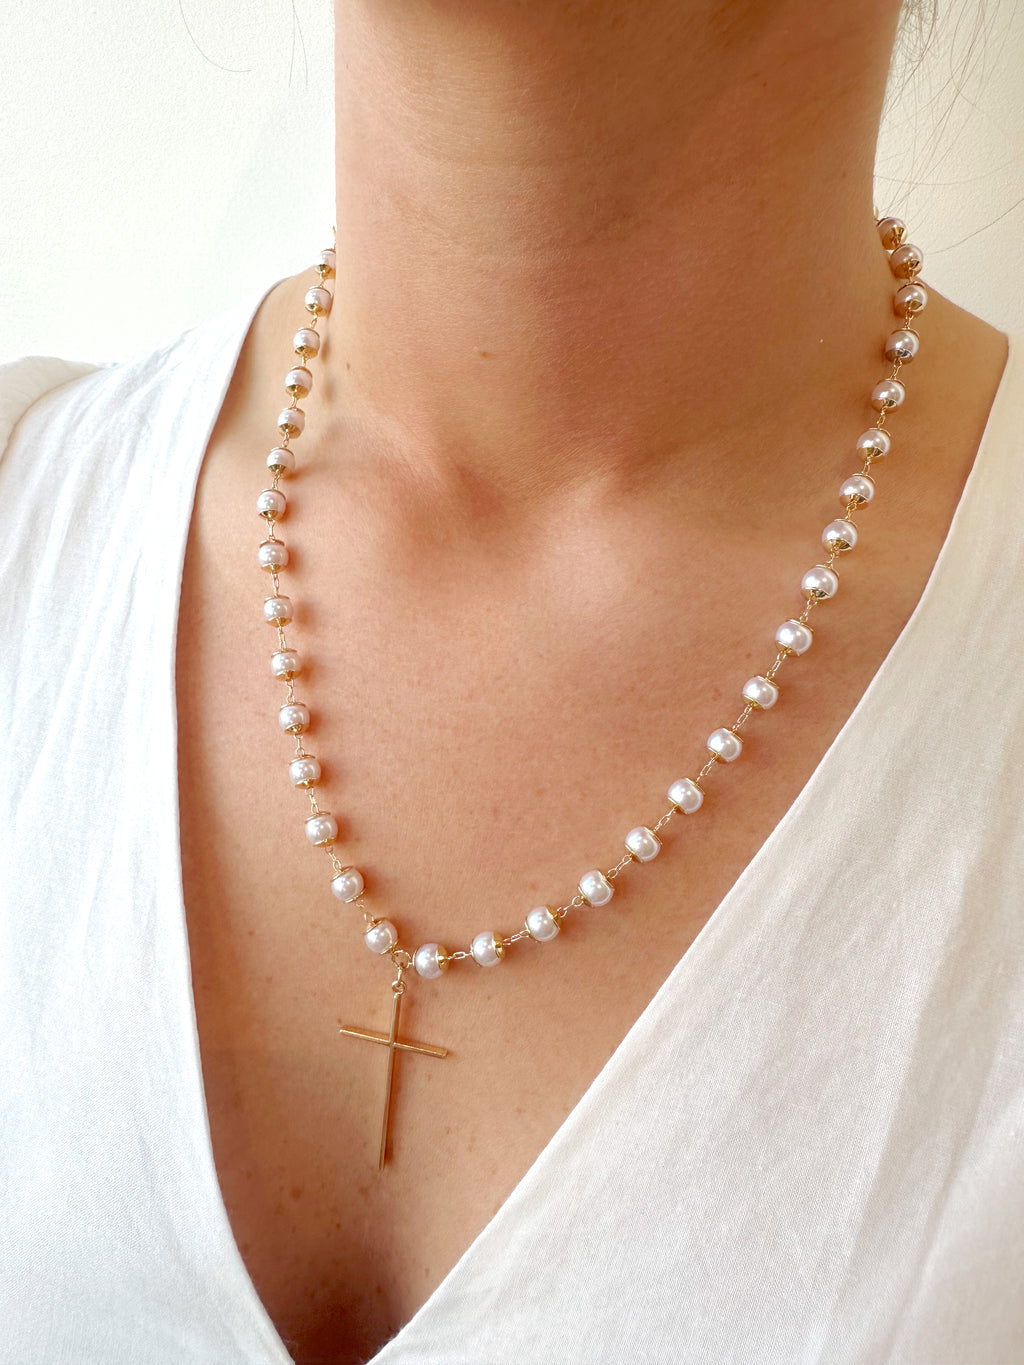 Bay Chain Necklace